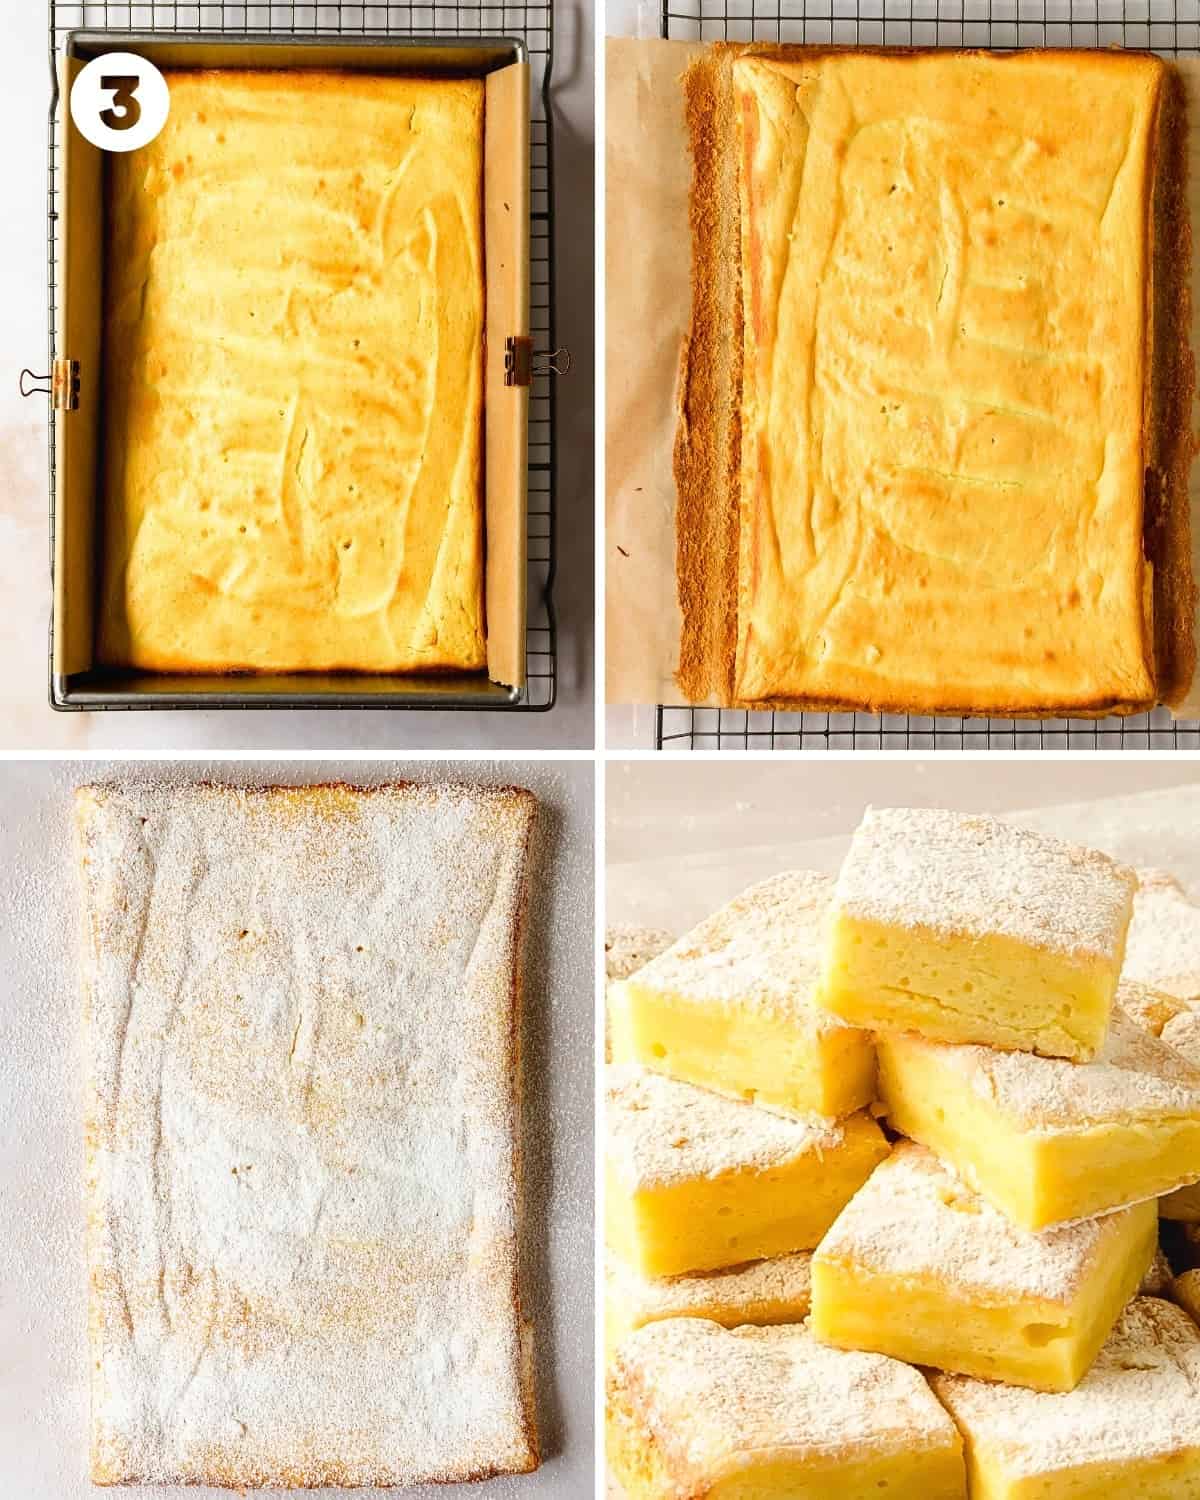 Bake the lemon cake bars for 30 - 40 minutes or until a toothpick inserted into the center comes out clean. The edges of the lemon bars should pull slightly from the edge of the pan and the top should be a light golden brown. Cool the cake in the cake pan for 60 minutes or until room temperature. Using the parchment paper, gently lift the lemon pie filling cake bars out of the pan using the parchment paper on the sides of the pan. Dust with powdered sugar if you like, slice and enjoy. 